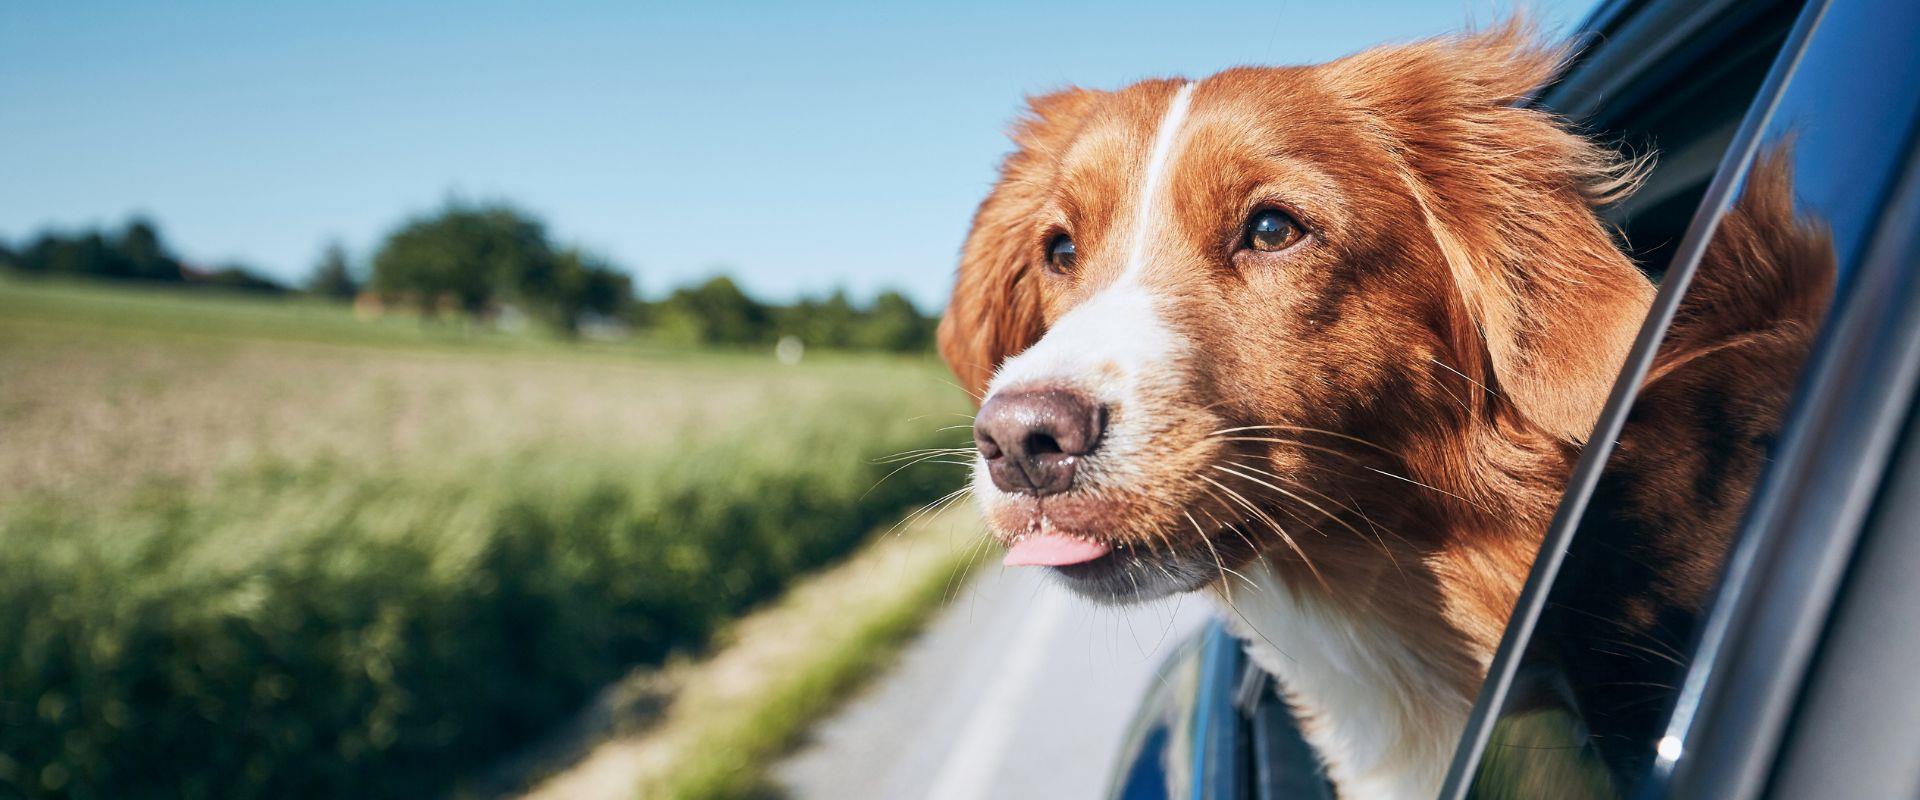 If you are planning a trip to Piacenza and want to bring your faithful friend, choose Best Western Park Hotel: our Pet-friendly hotel is ready to welcome you!